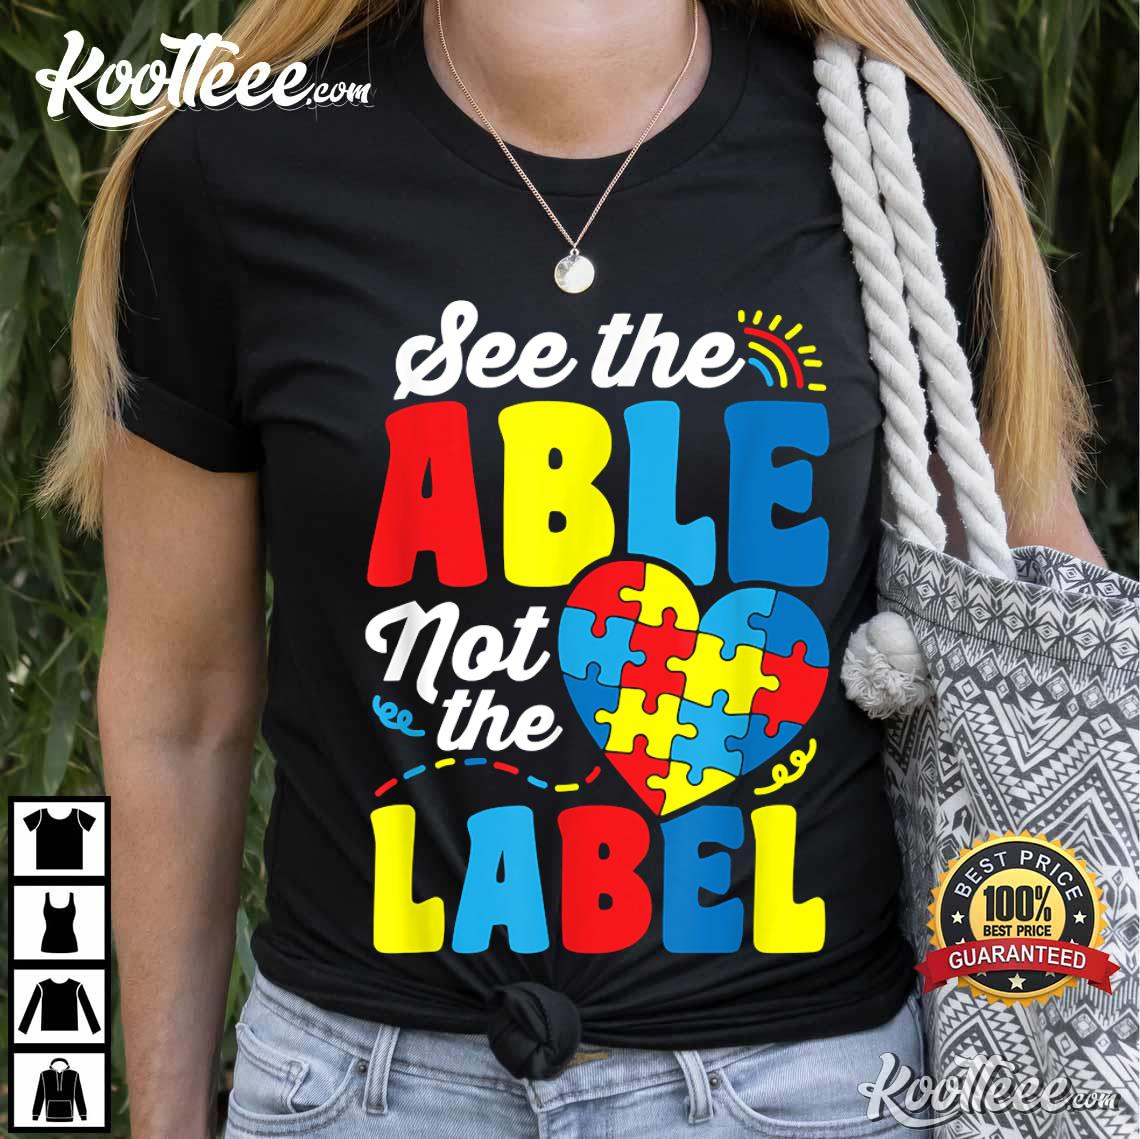 See The Able Not The Label Autism Awareness Gift T-Shirt